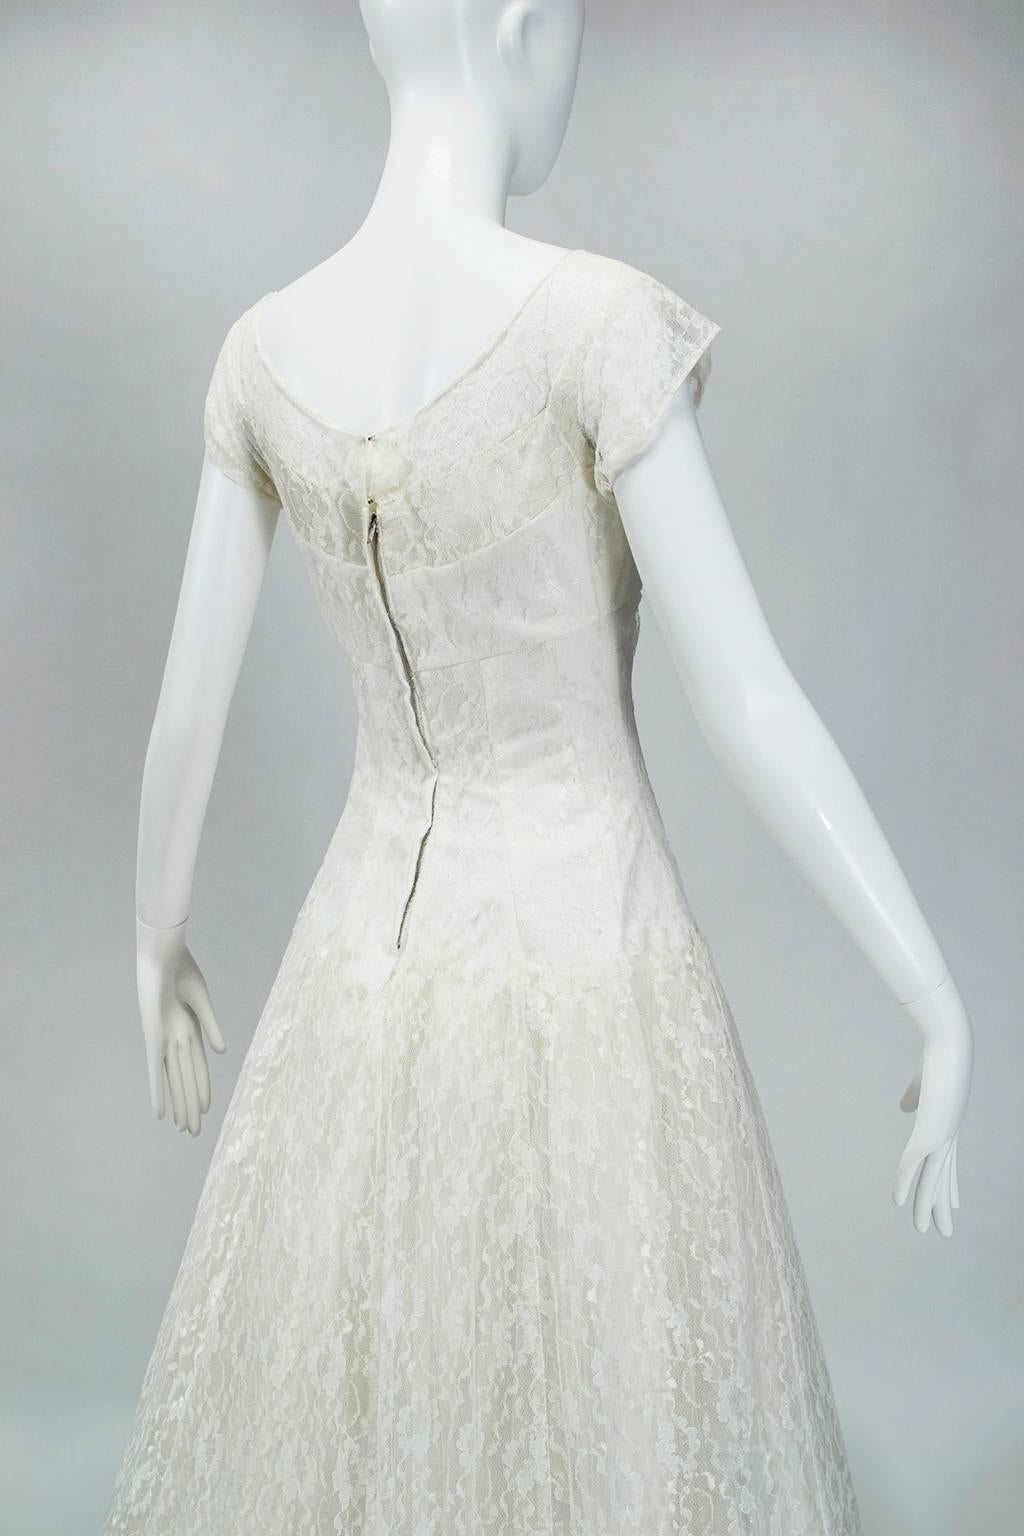 Gray Ivory Lace Drop-Waist Wedding Gown with Bateau Neck - XS, 1950s For Sale